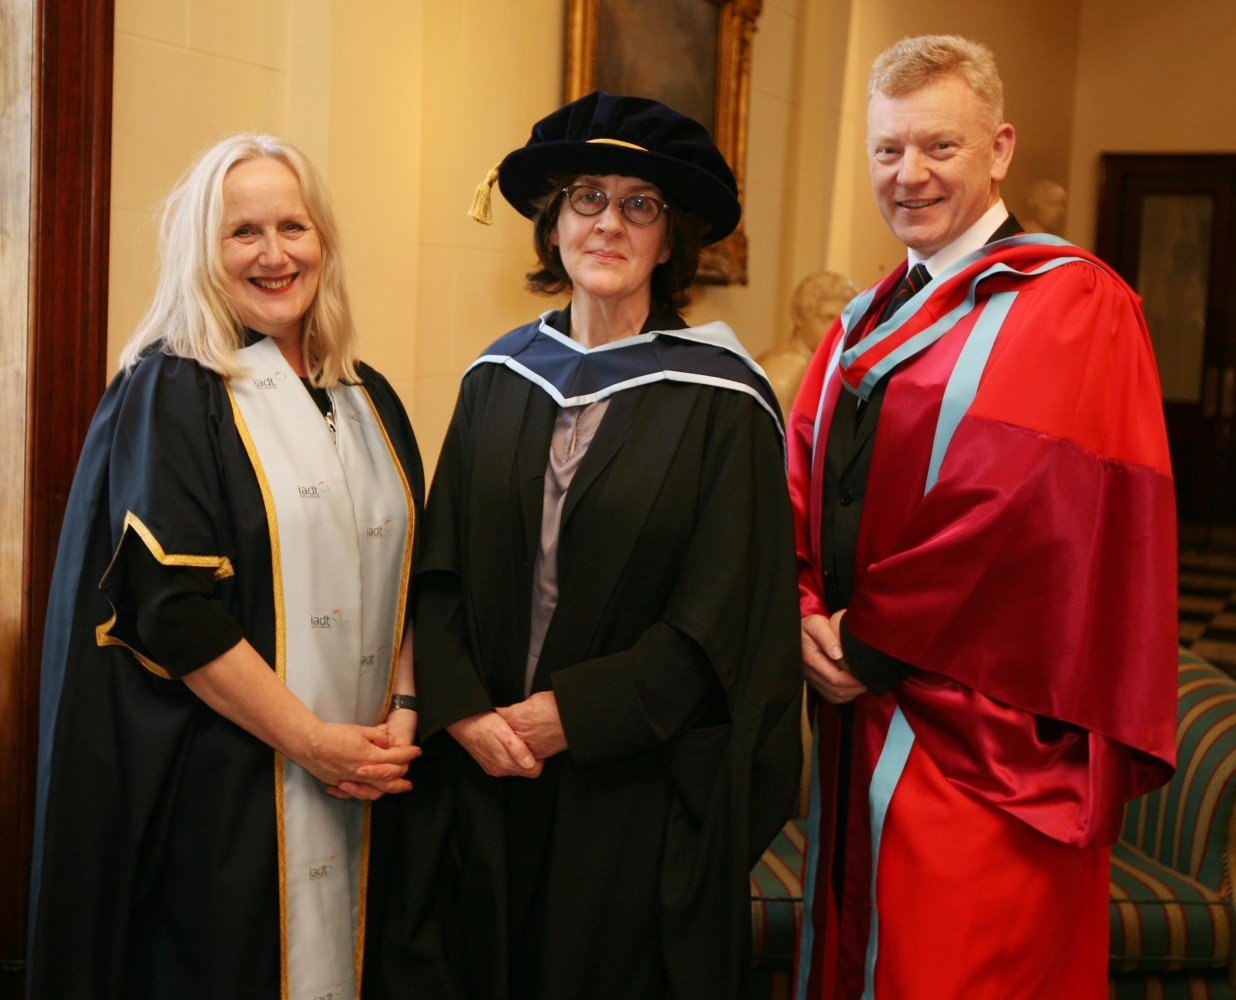 Dr. Annie Doona, Consolata Boyle and Dr. Andrew Power